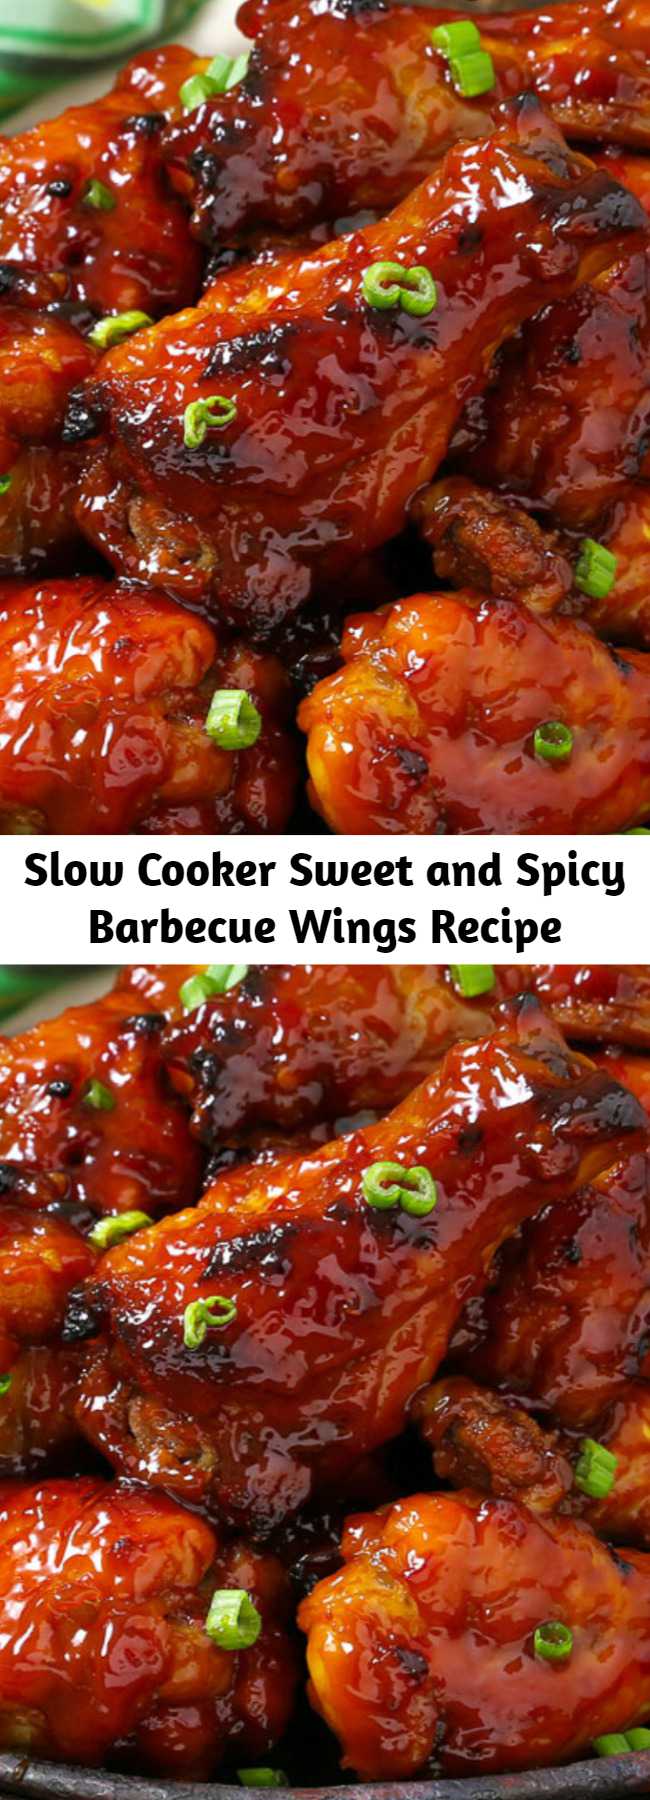 Slow Cooker Sweet and Spicy Barbecue Wings Recipe - Slow Cooker Sweet and Spicy Barbecue Wings are so tender the meat falls off the bone and melts in your mouth. You get the best of both worlds with this bold barbecue sauce. Made in the crockpot you won't find an easier recipe! They just about cook themselves. #Crockpot #Appetizer